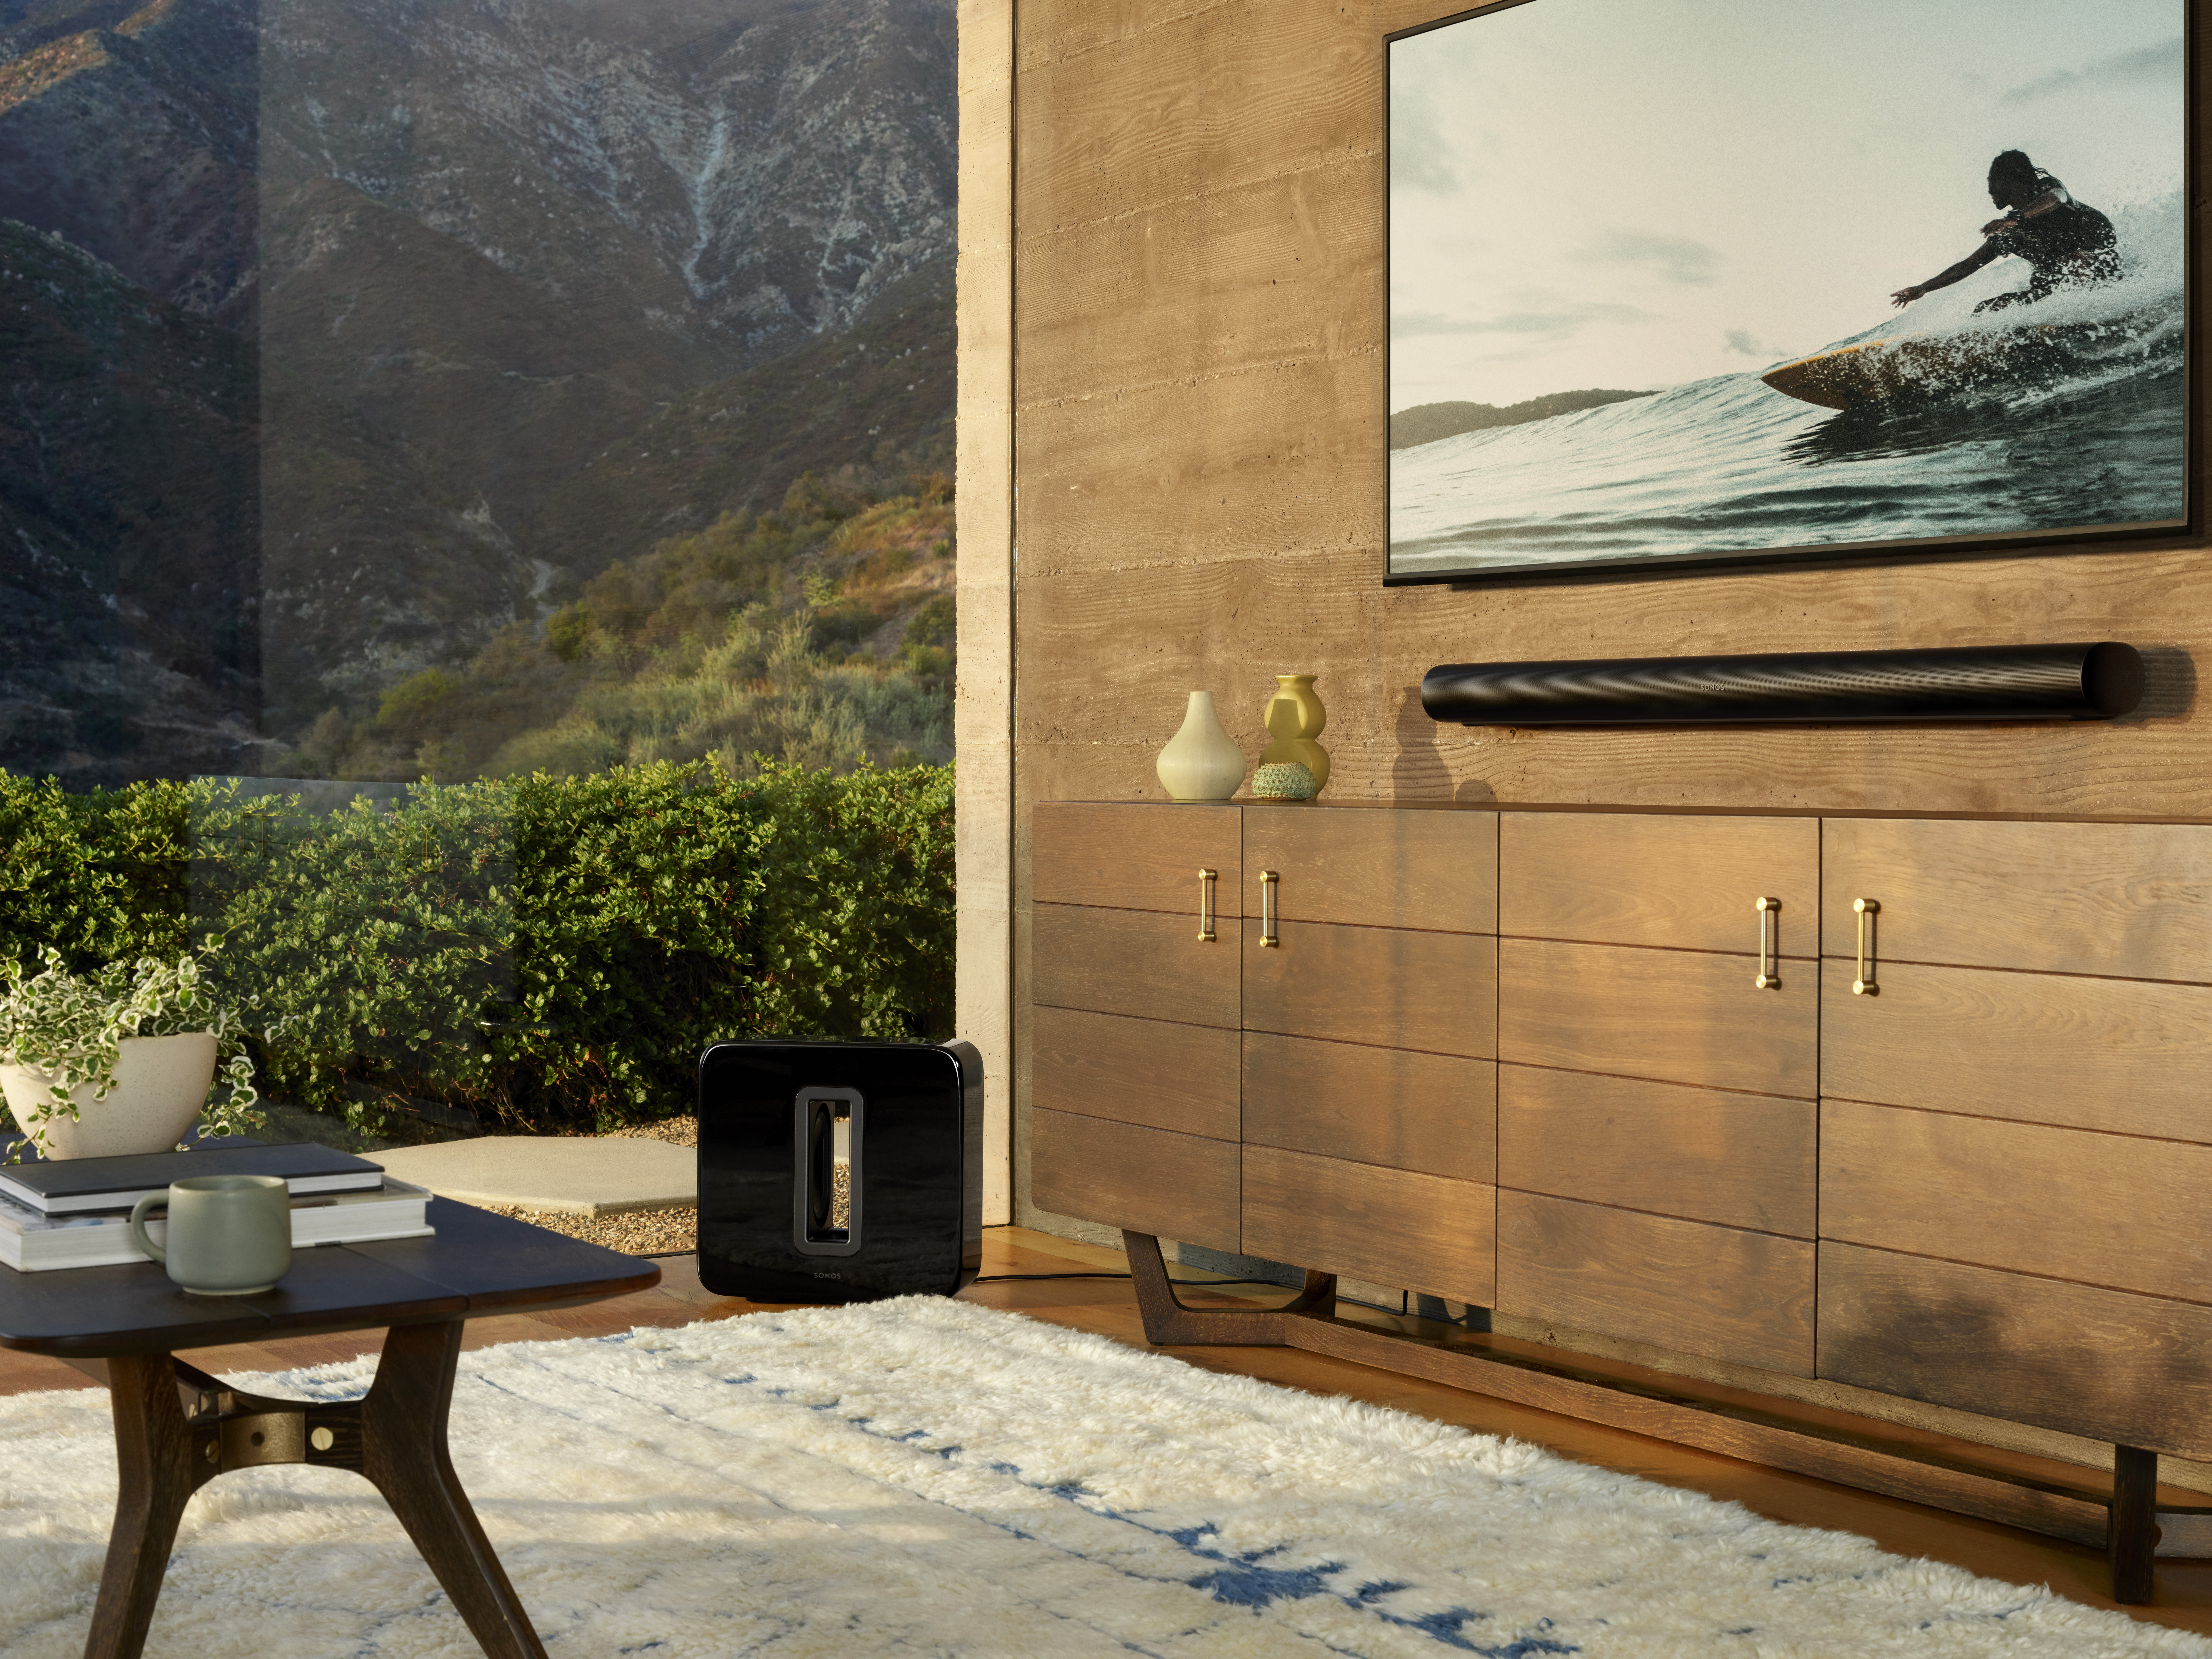 The Sonos Arc black soundbar shown in a living room with built-in wooden cabinets and a white rug 